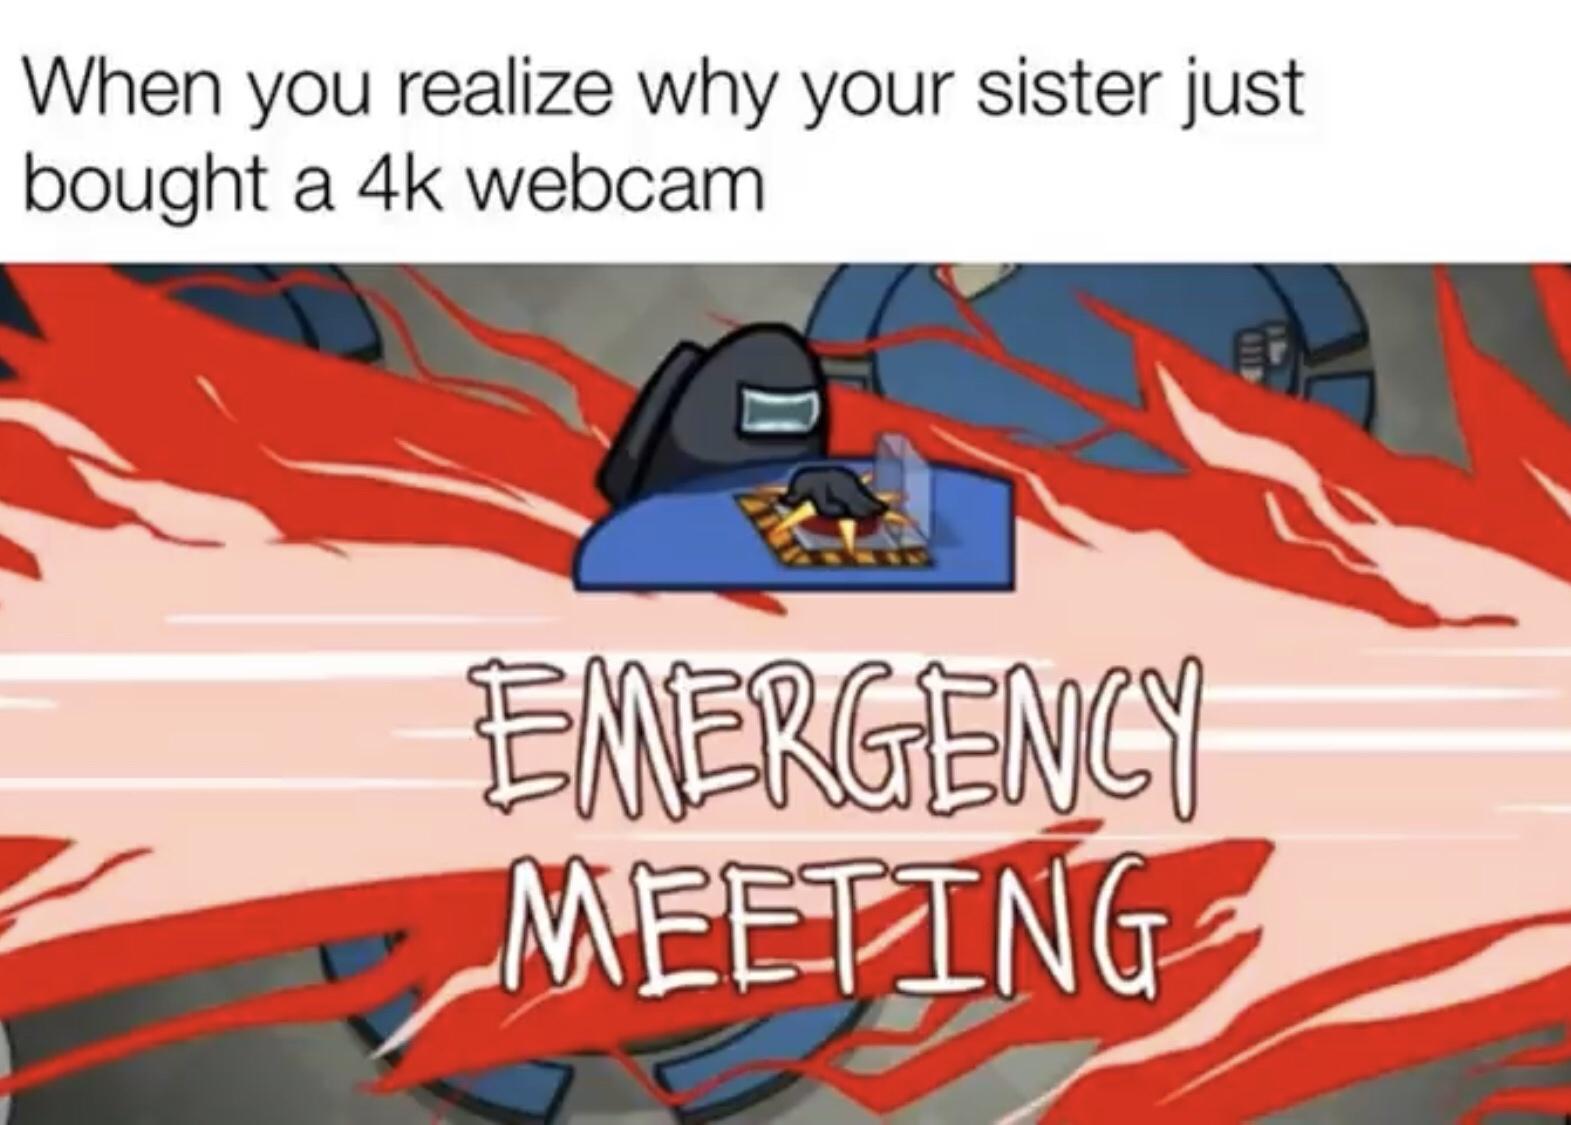 emergency meeting among us - When you realize why your sister just bought a 4k webcam I Emergency Meeting